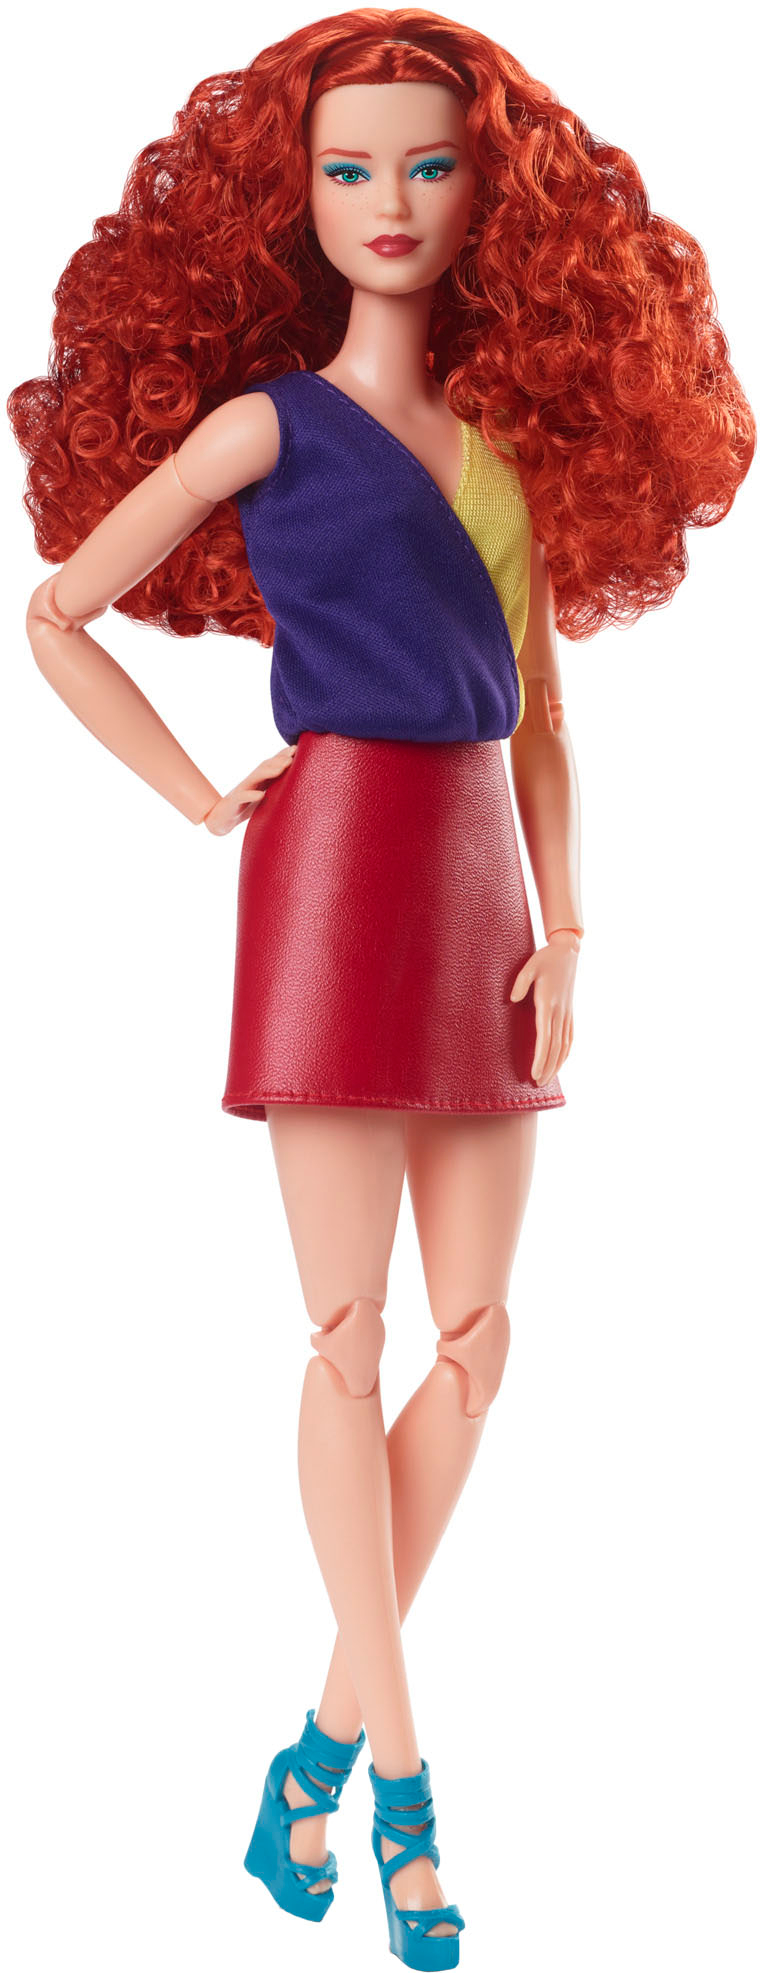 Barbie Signature Looks Model # 13 Long Red Hair Tall Jointed - New  NRFB🔵🟡🔴🟣